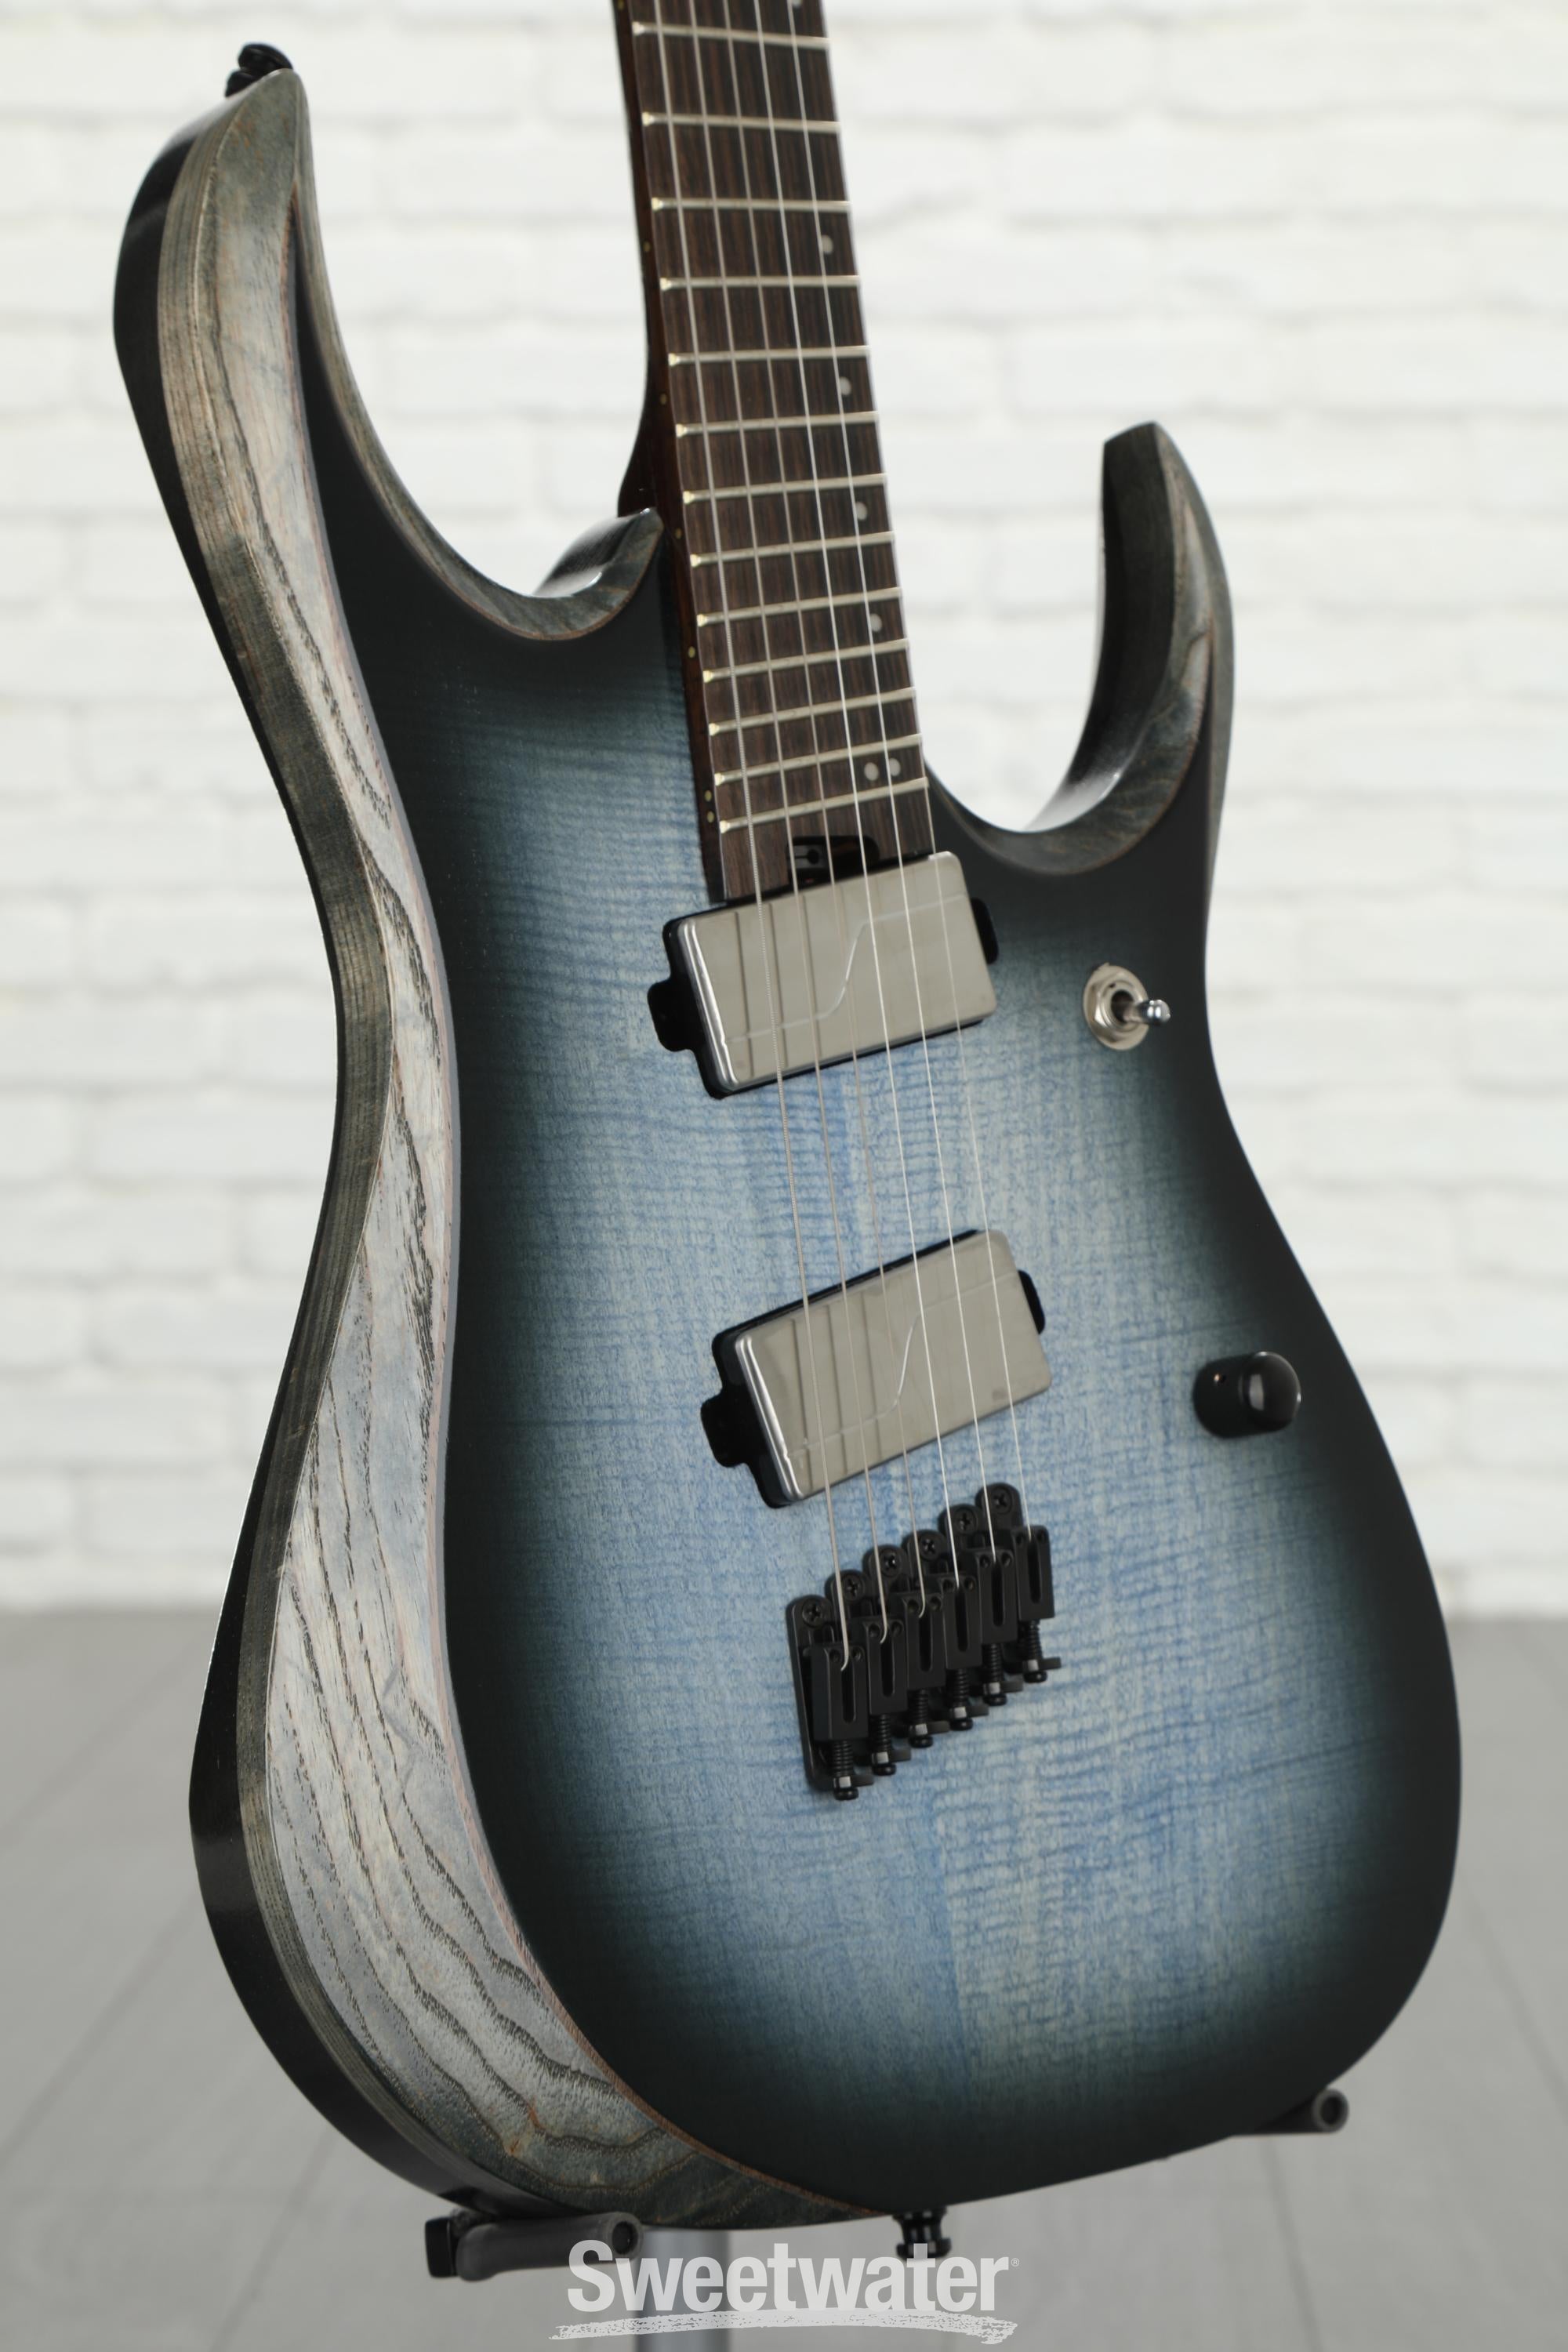 Ibanez Axion Label RGD61ALMS - Cerulean Blue Burst Low Gloss